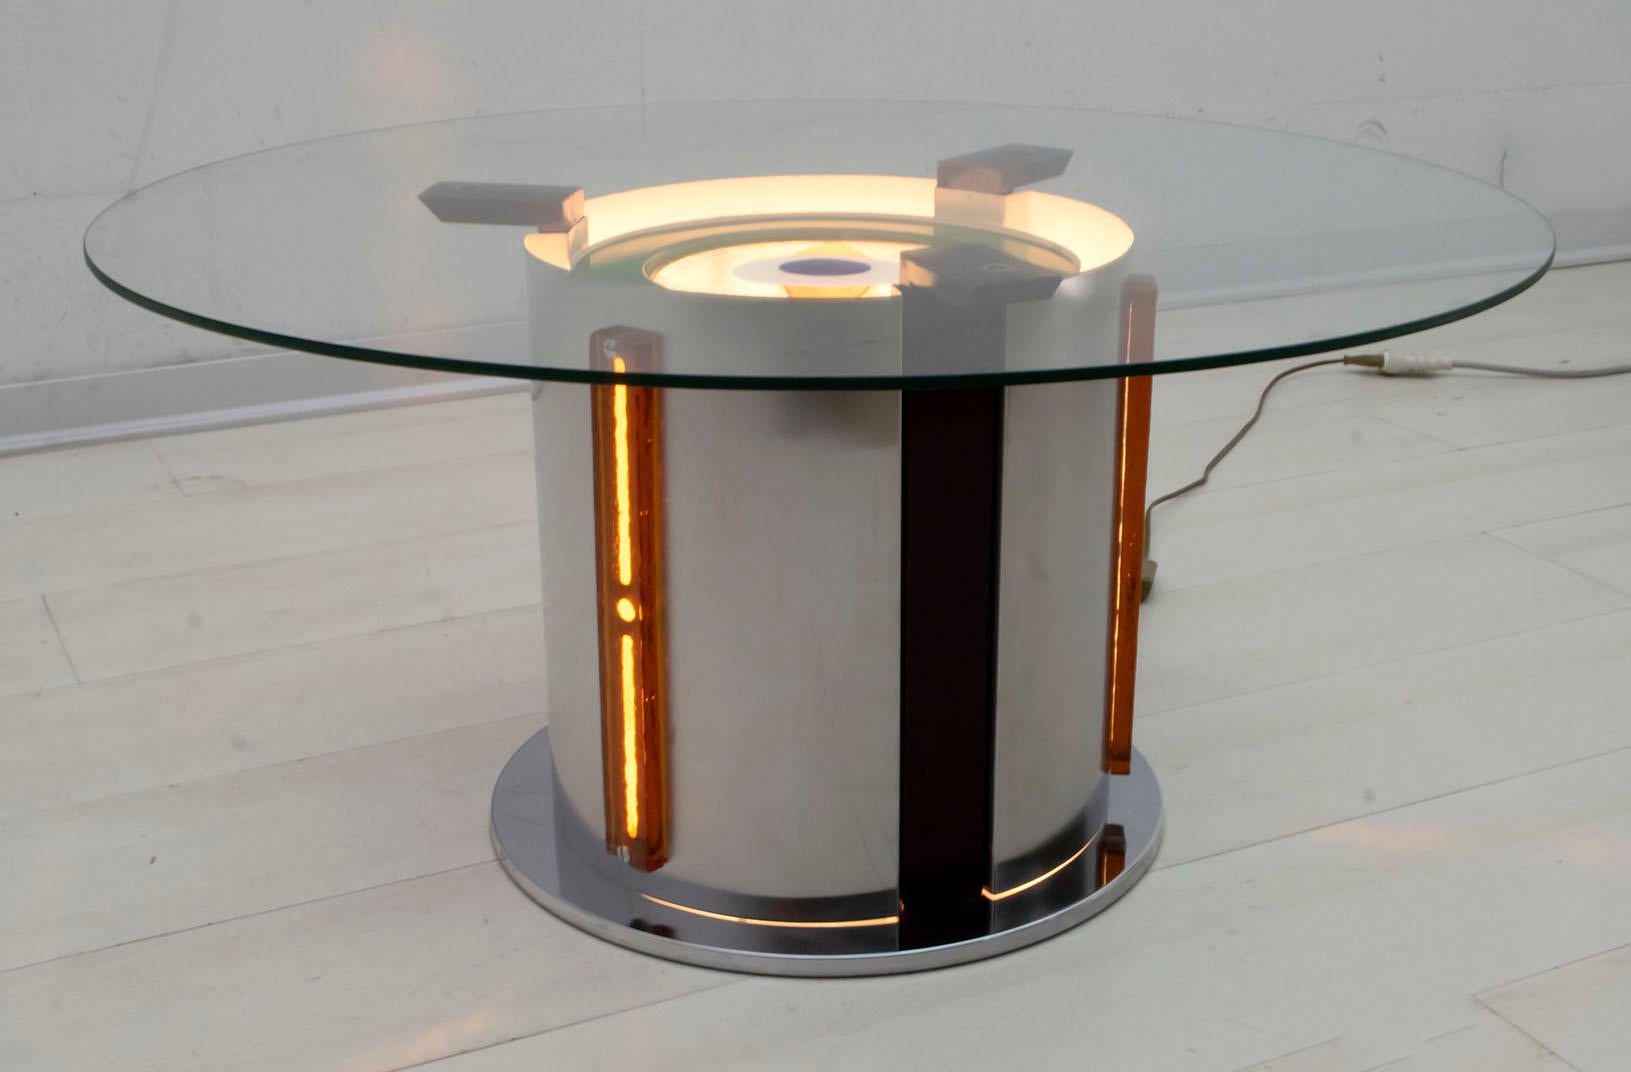 Italian Angelo Brotto Midcentury Glass and Steel Bright Coffee Table by Poliarte, 1970s